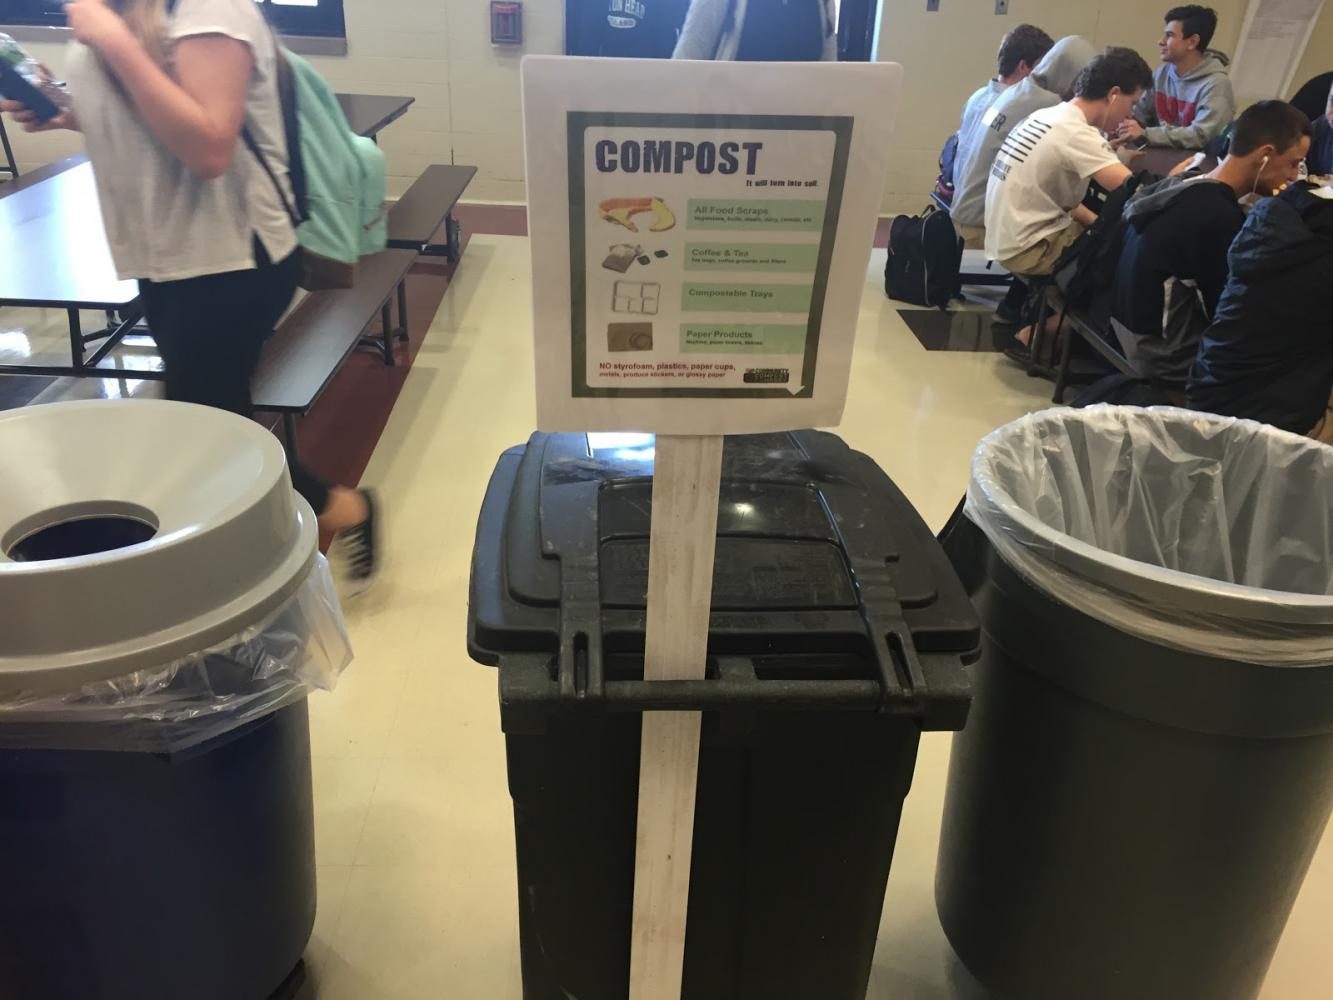 In the first week of May, the compost bin was finally put in the cafeteria for students to use during lunch. Environmental students sat near the compost bin to encourage and remind students they now have the option to compost.